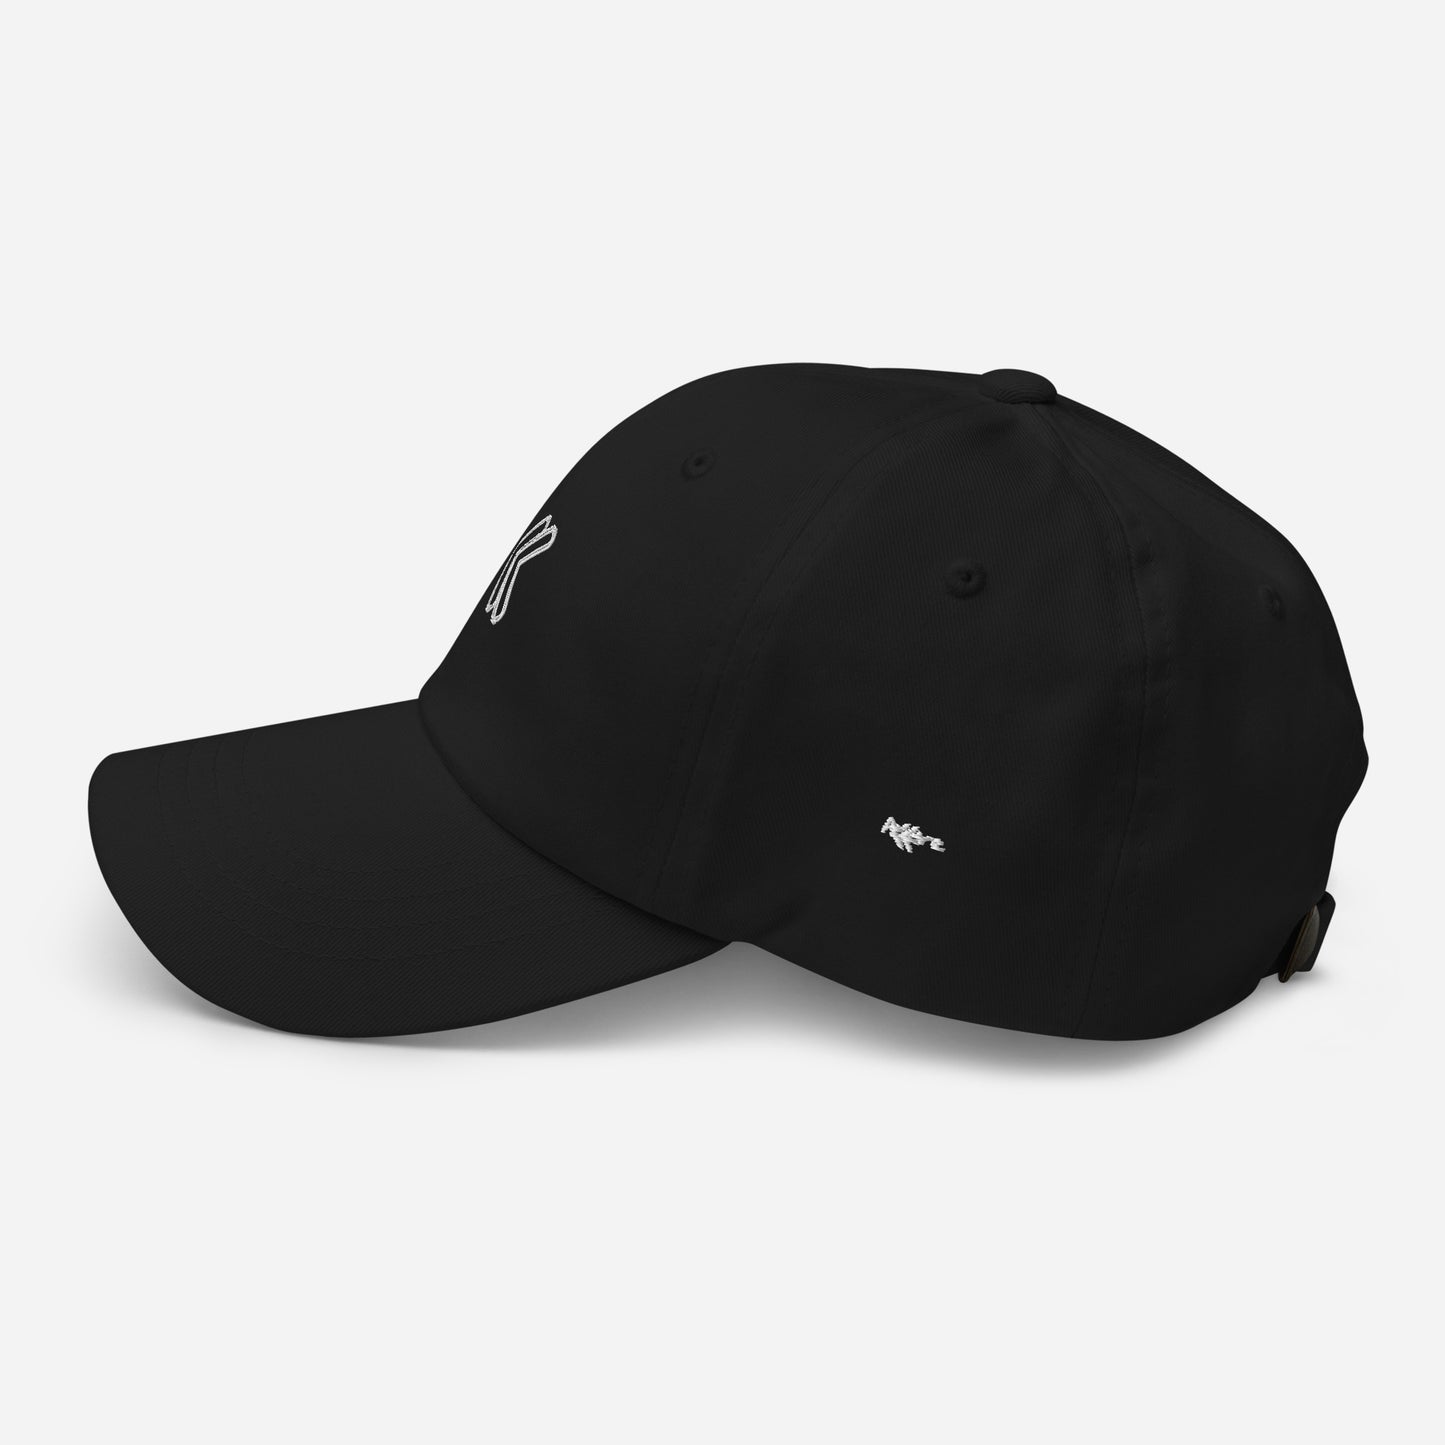 Embroidered Dad Hat